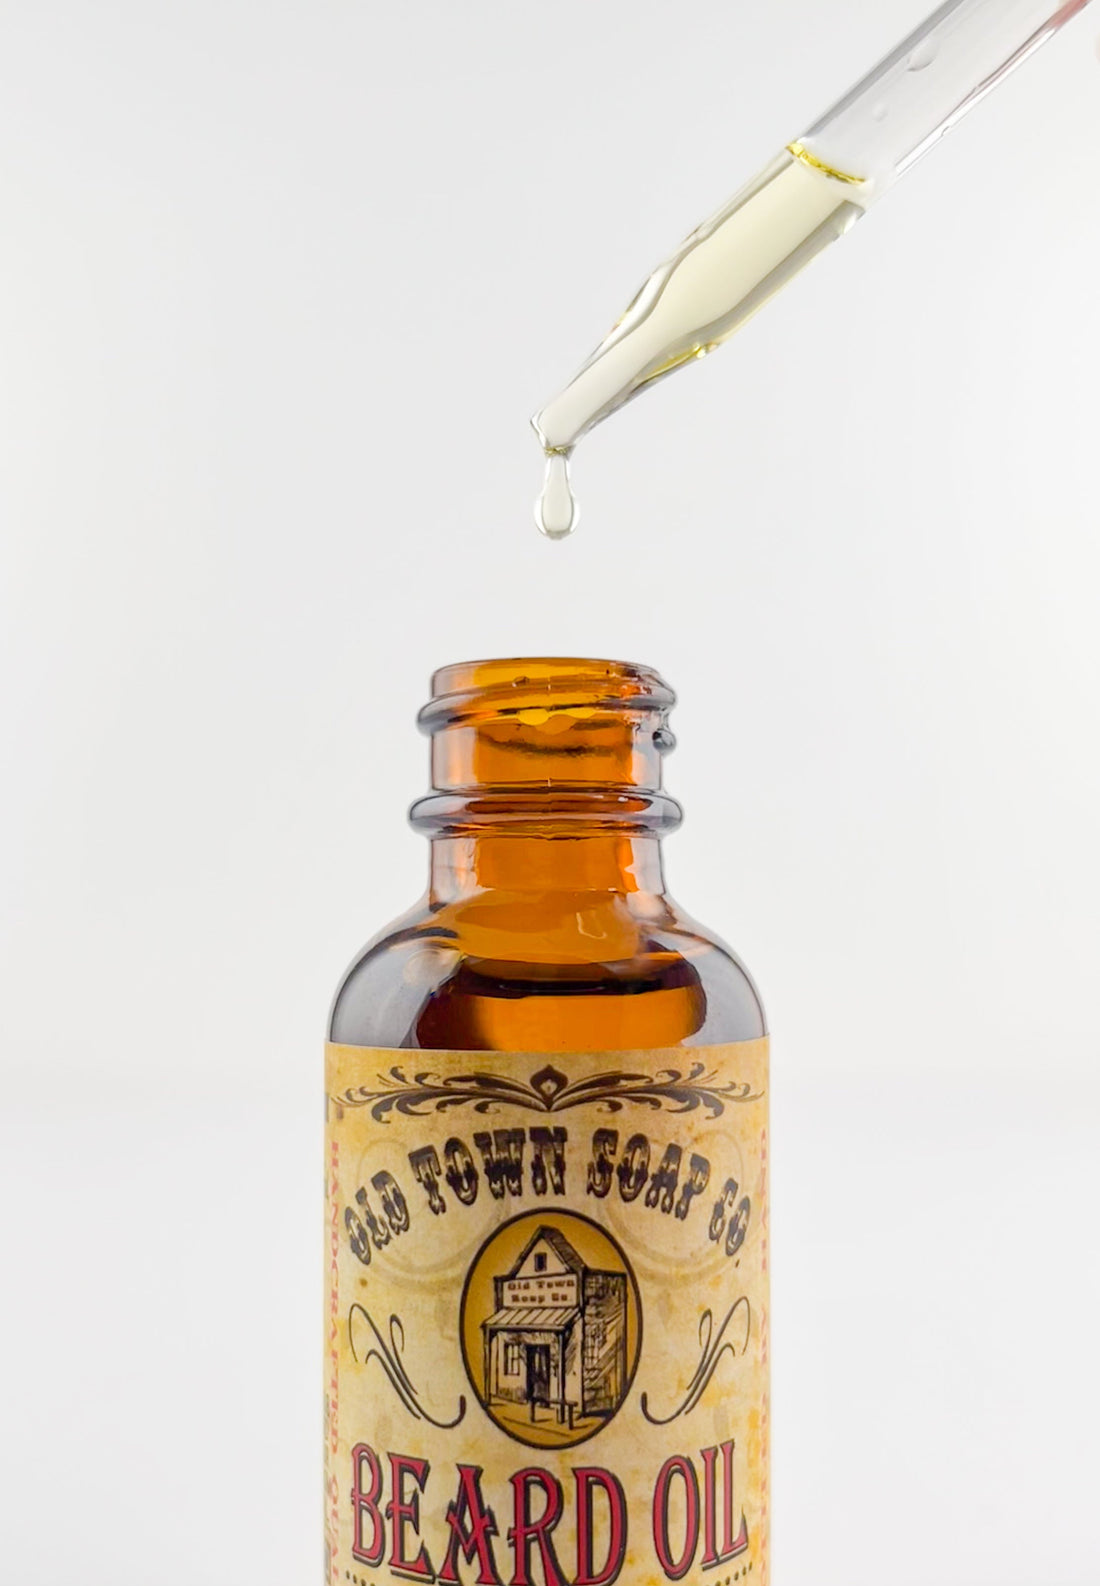 Tuscan Cypress Beard Oil - Old Town Soap Co.